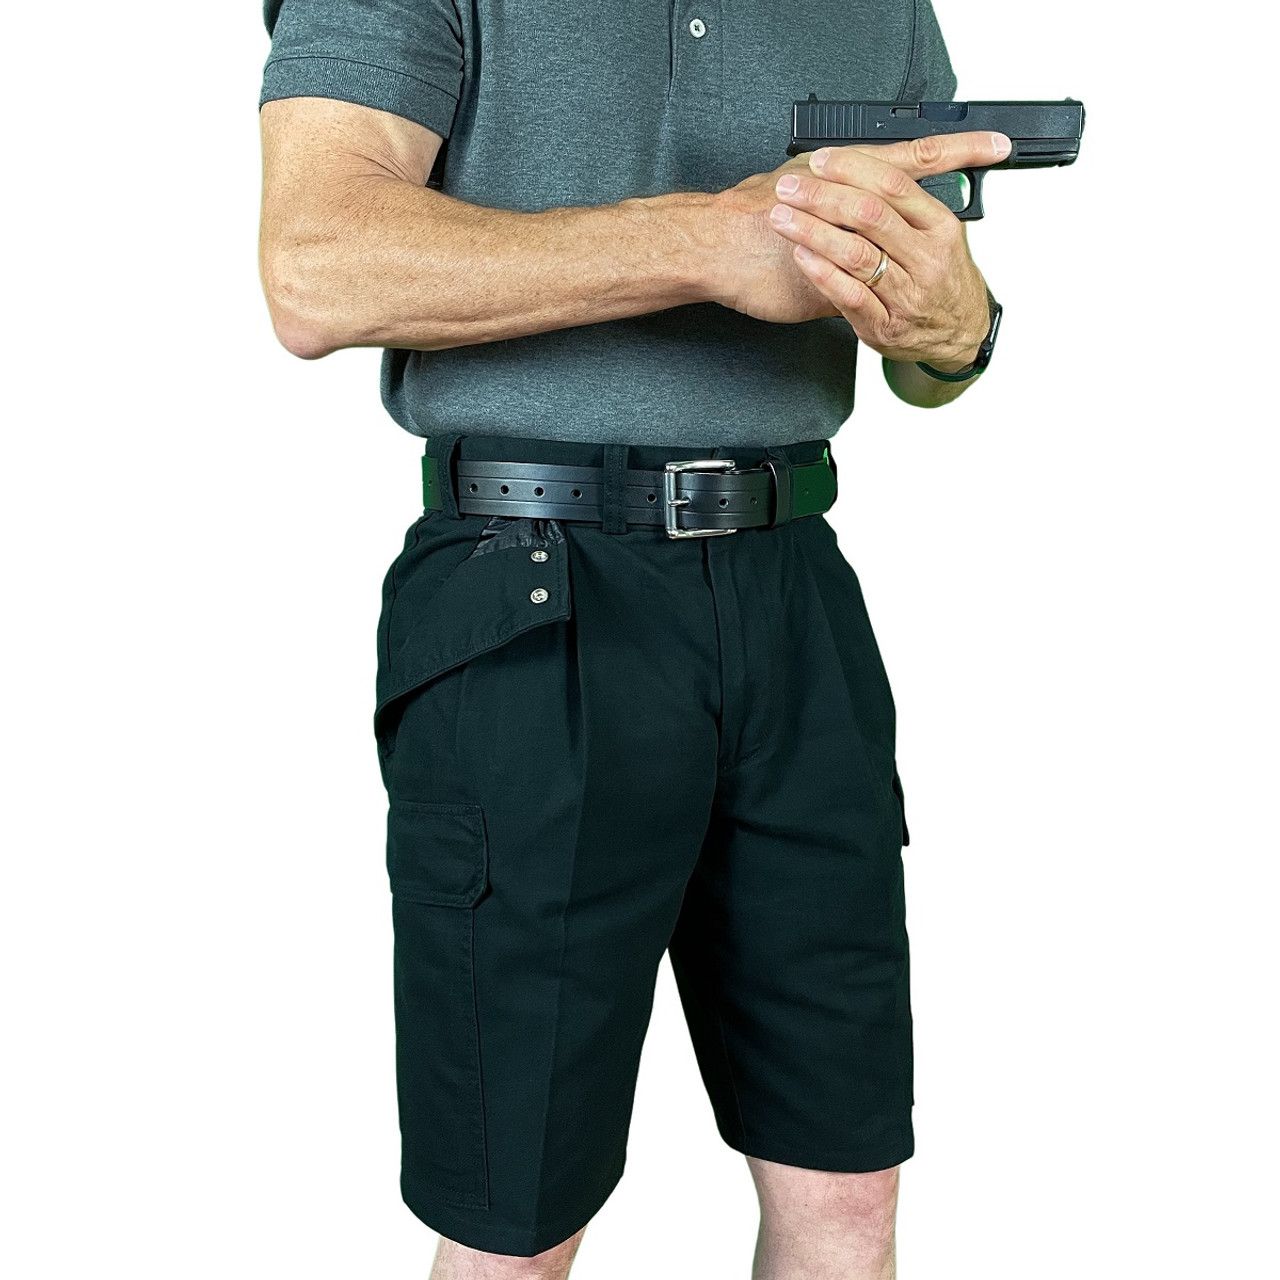 Concealed Carry Athletic Shorts With Pockets, Black